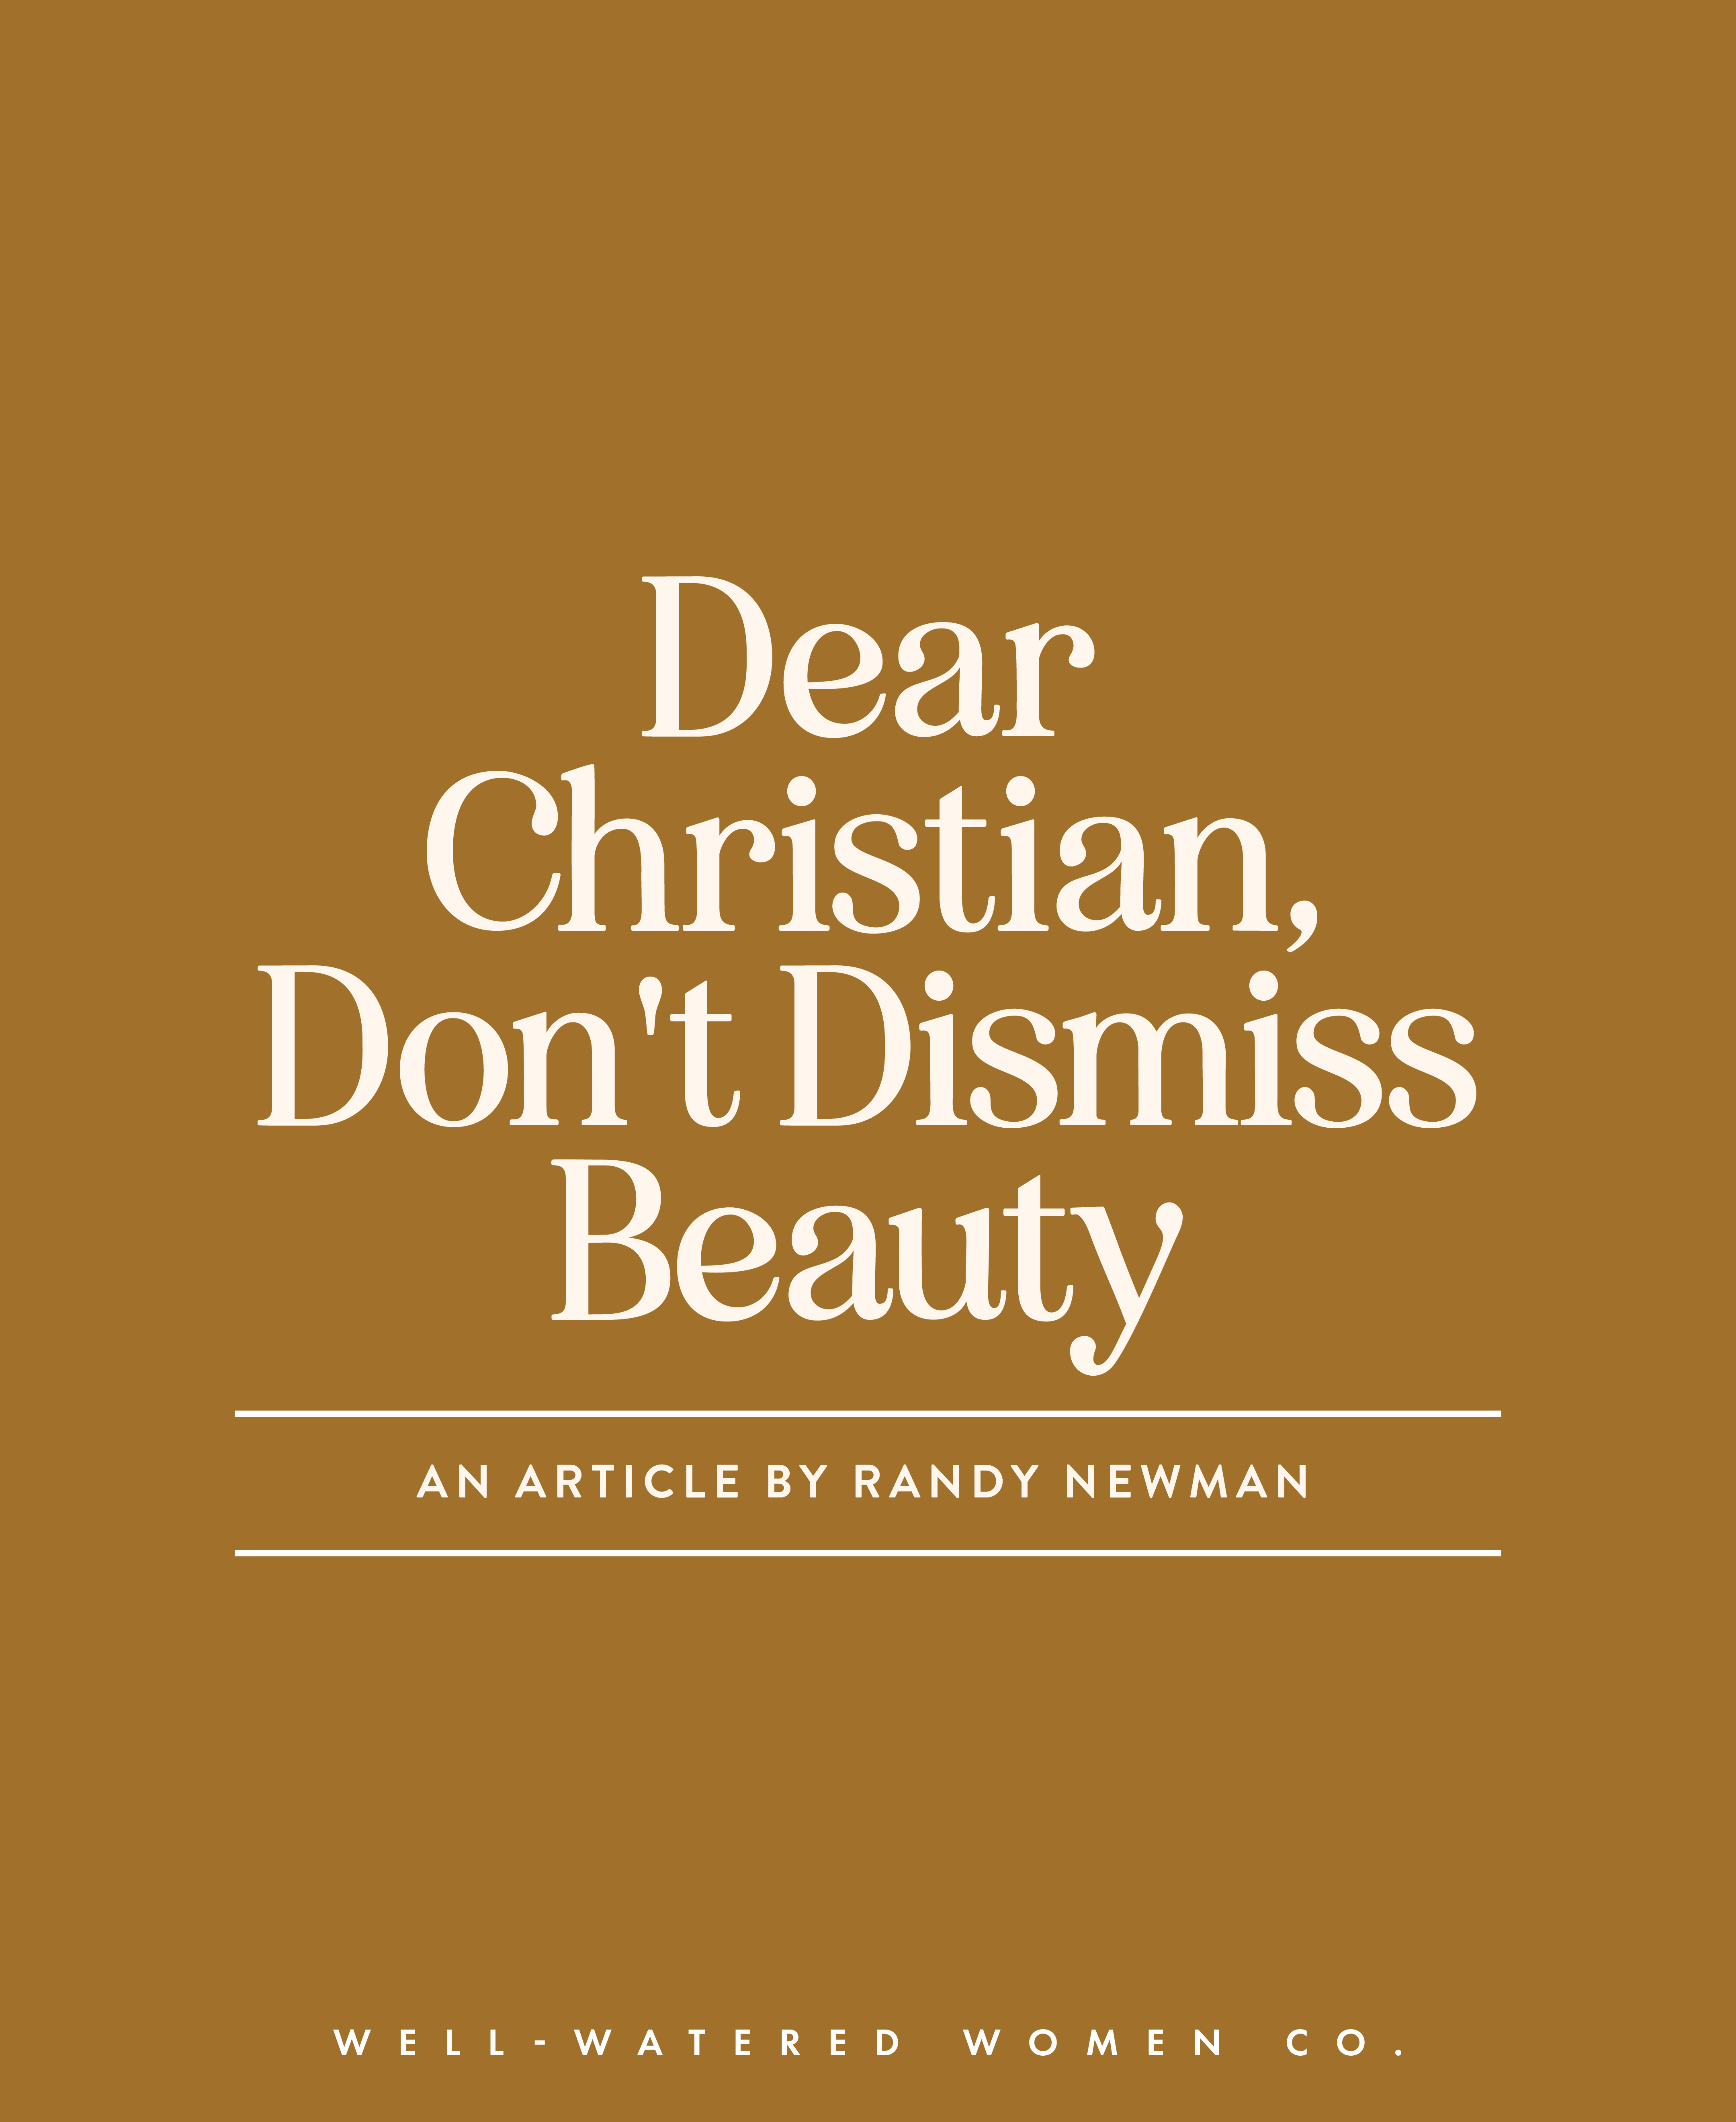 Dear Christian, Don't Dismiss Beauty - an article from Well-Watered Women